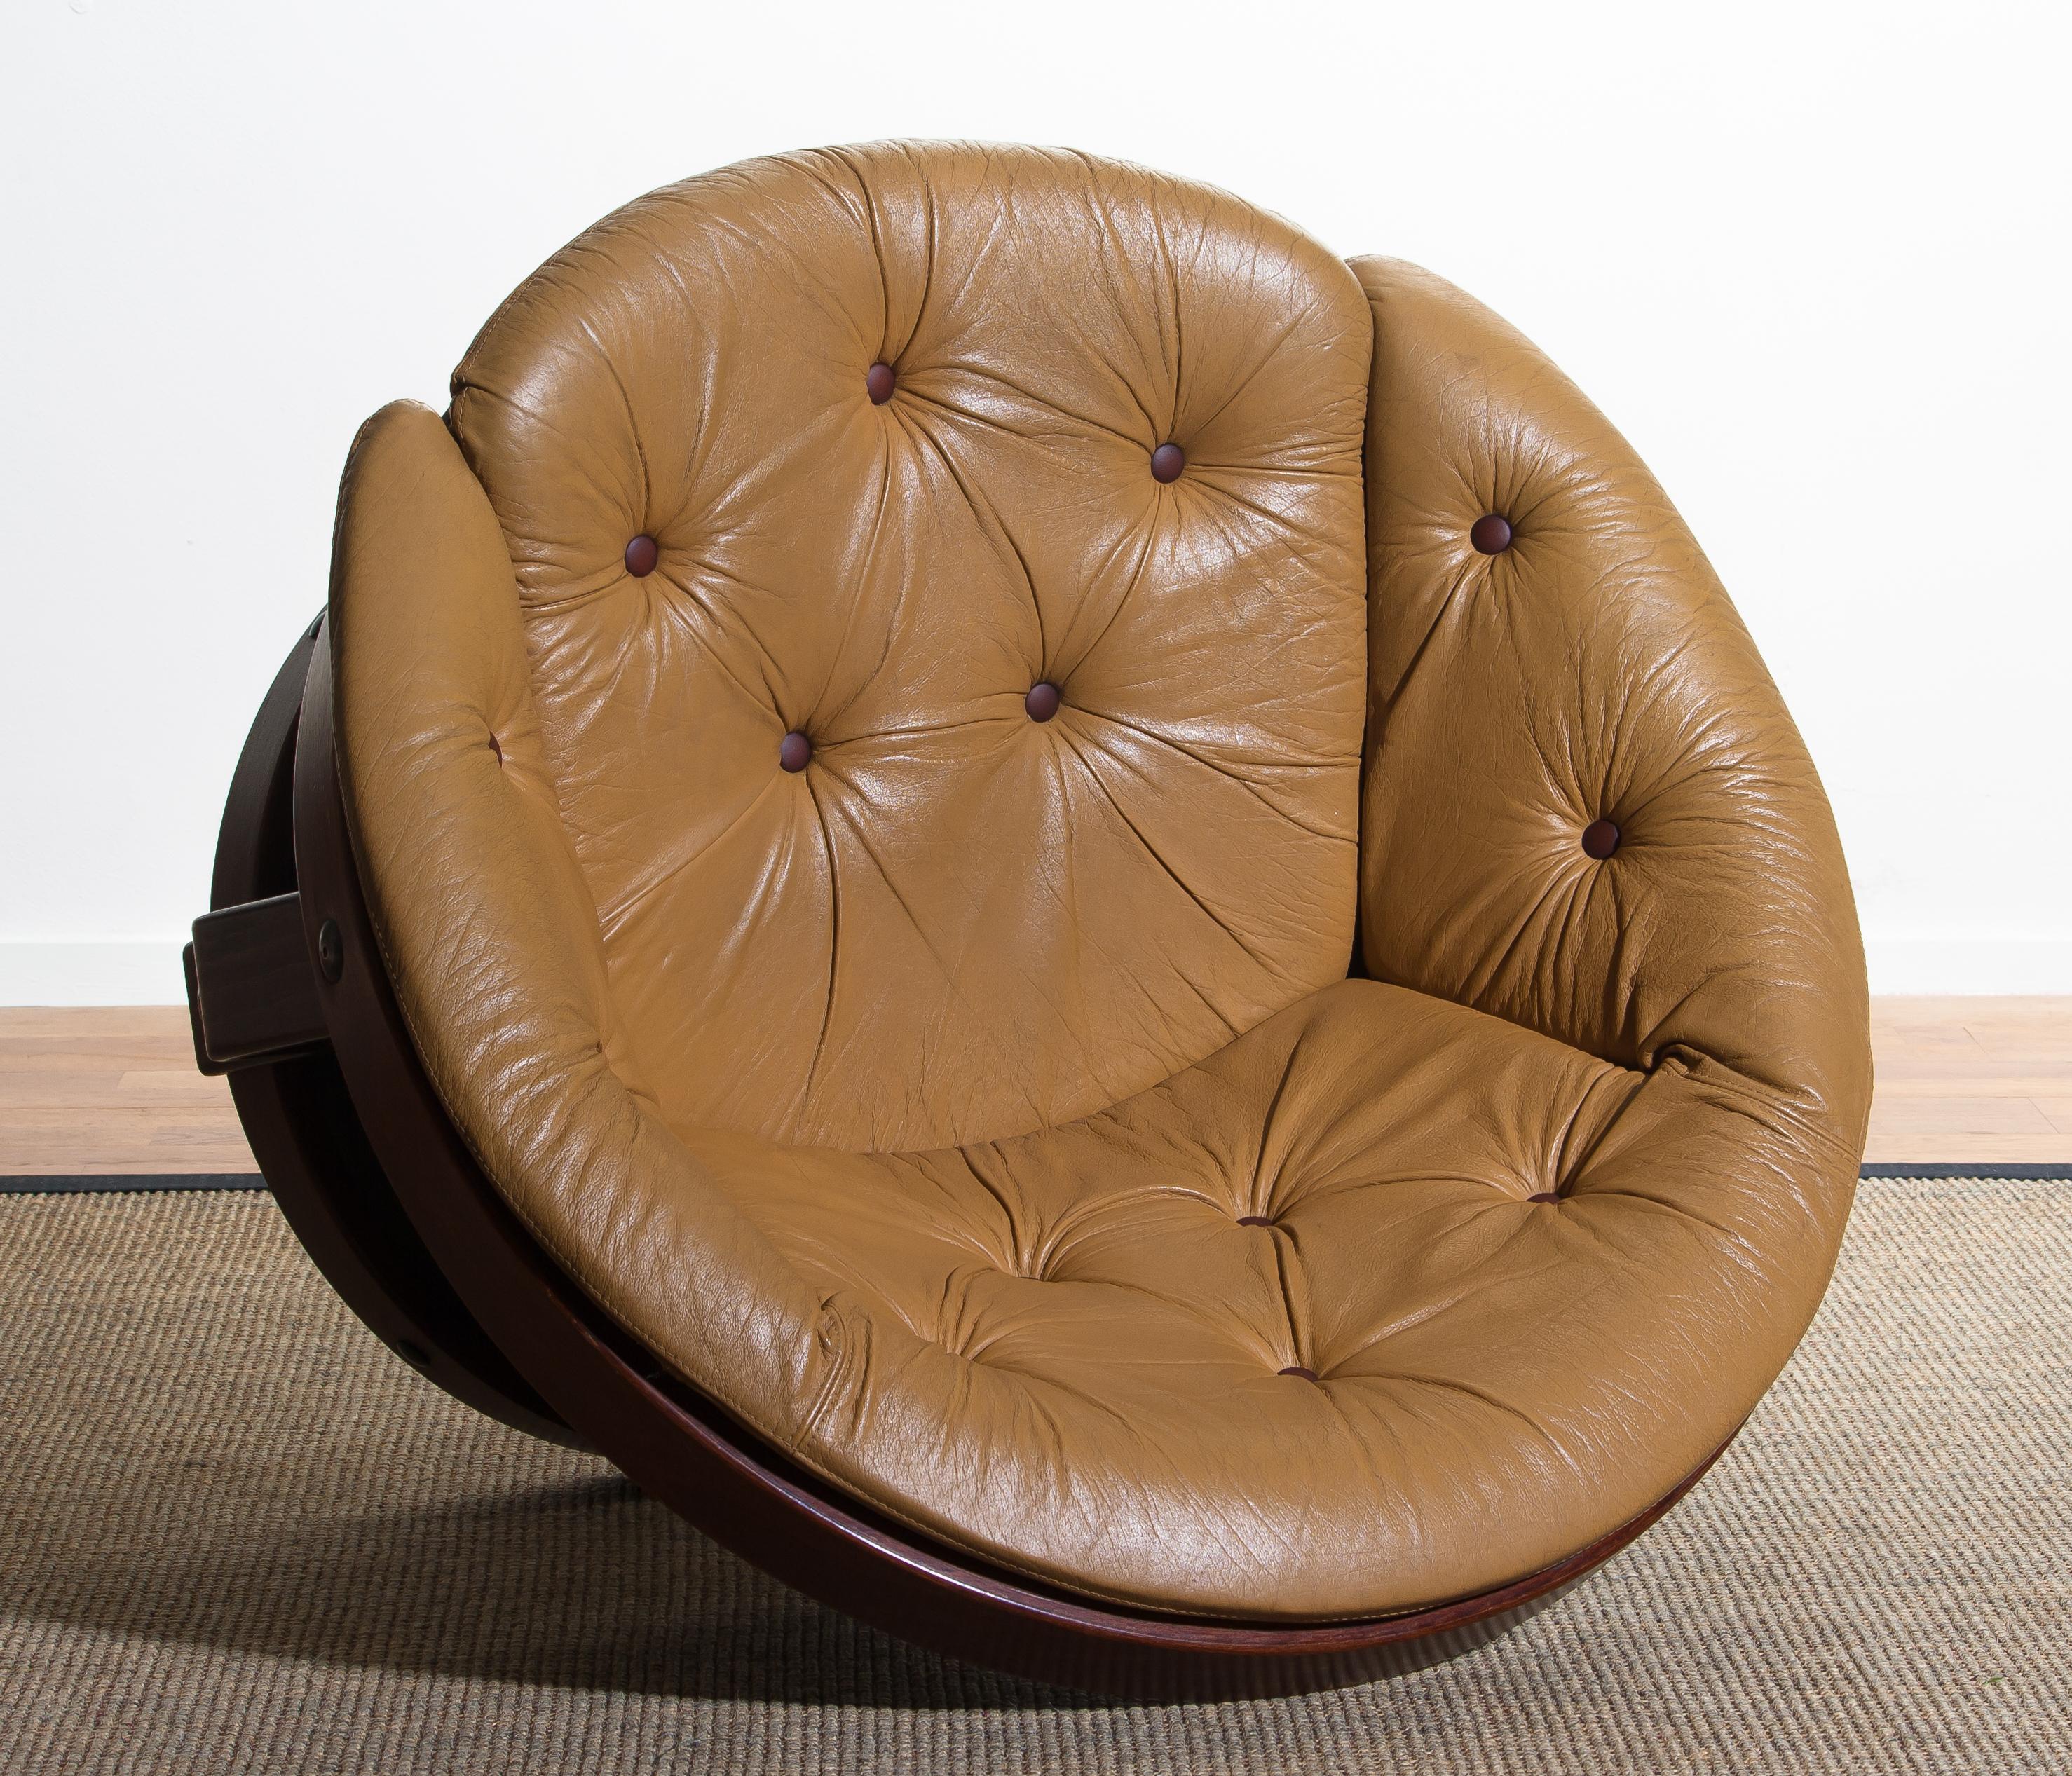 1970s Scandinavian Circle Shaped Swivel Chair by Oddmund Vad in Camel Leather 3